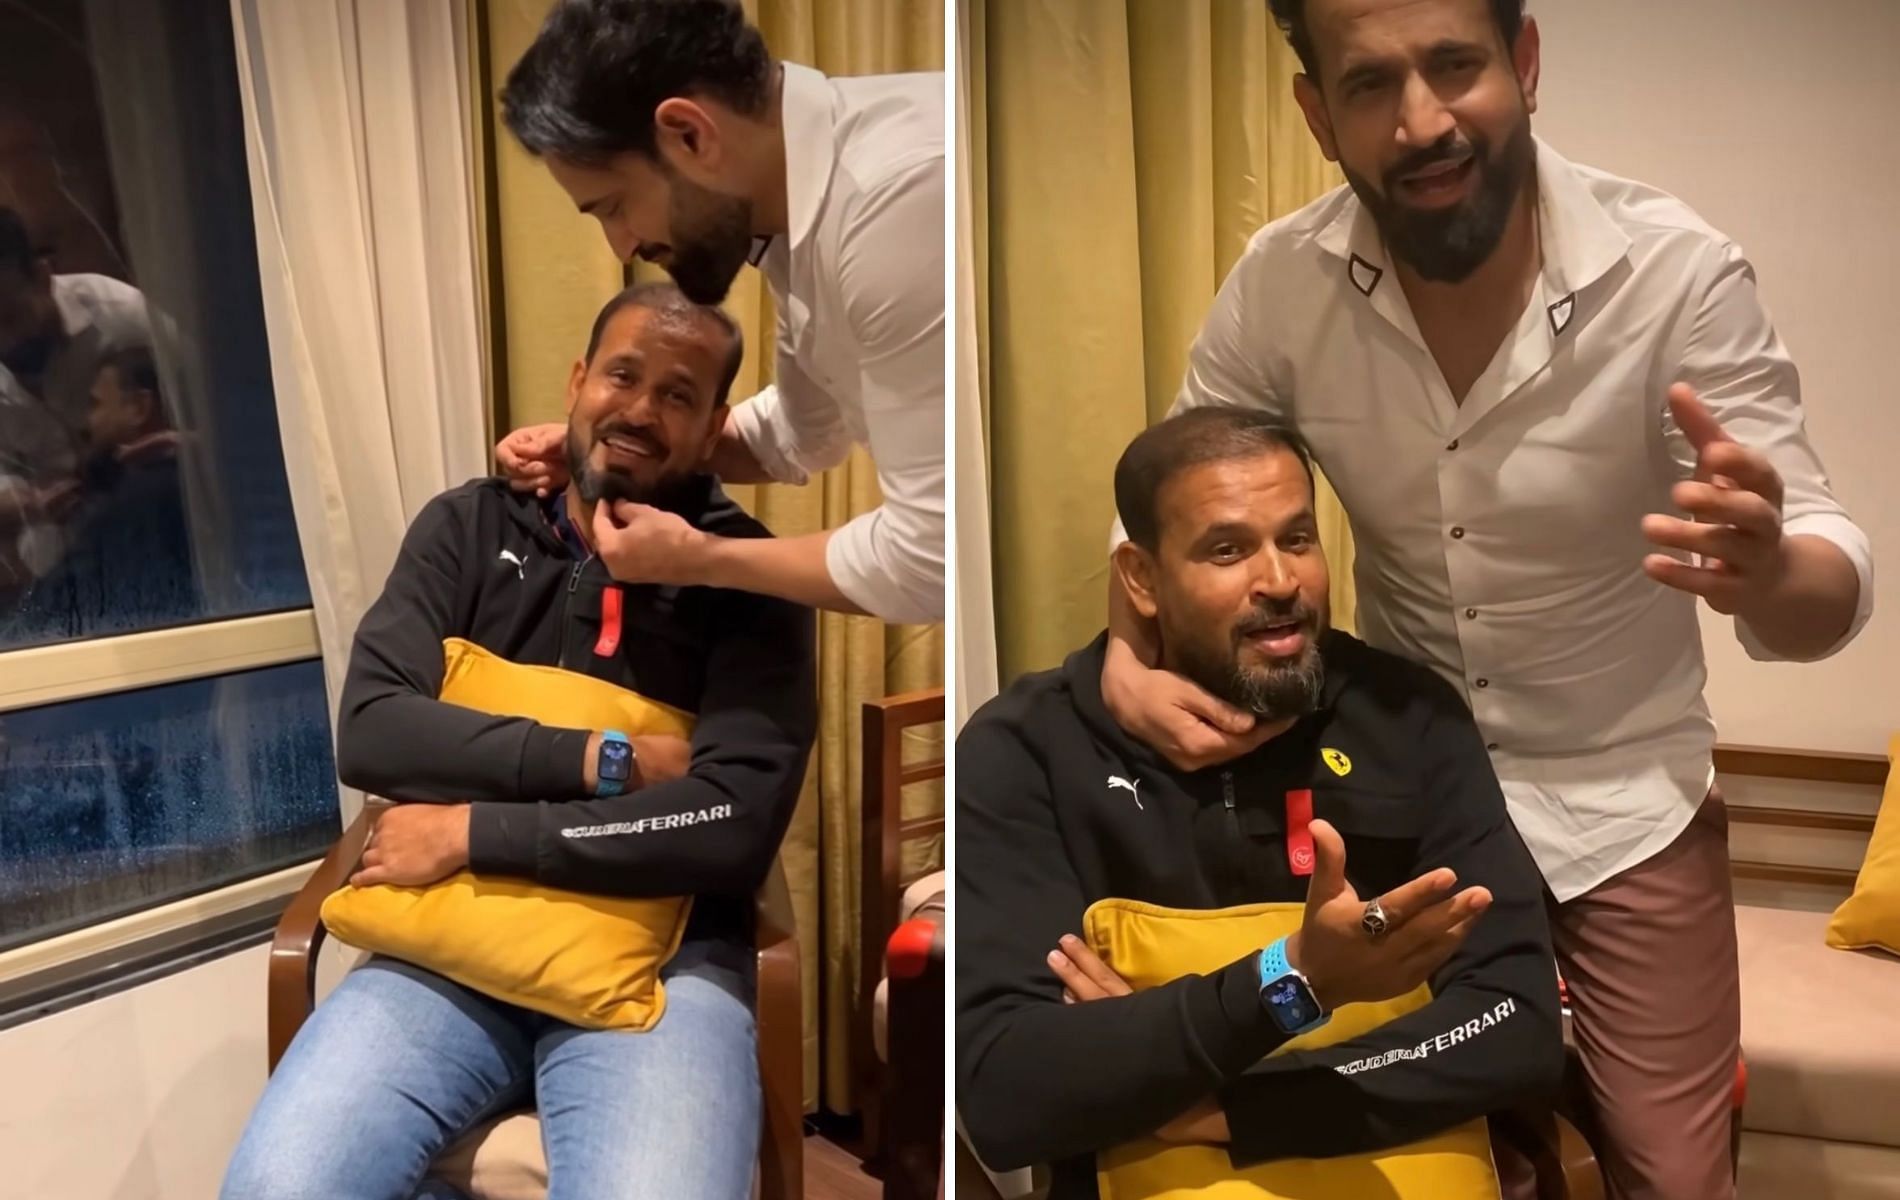 Yusuf Pathan (L) and Irfan Pathan entertain fans with videos on social media. (Credit: Instagram)